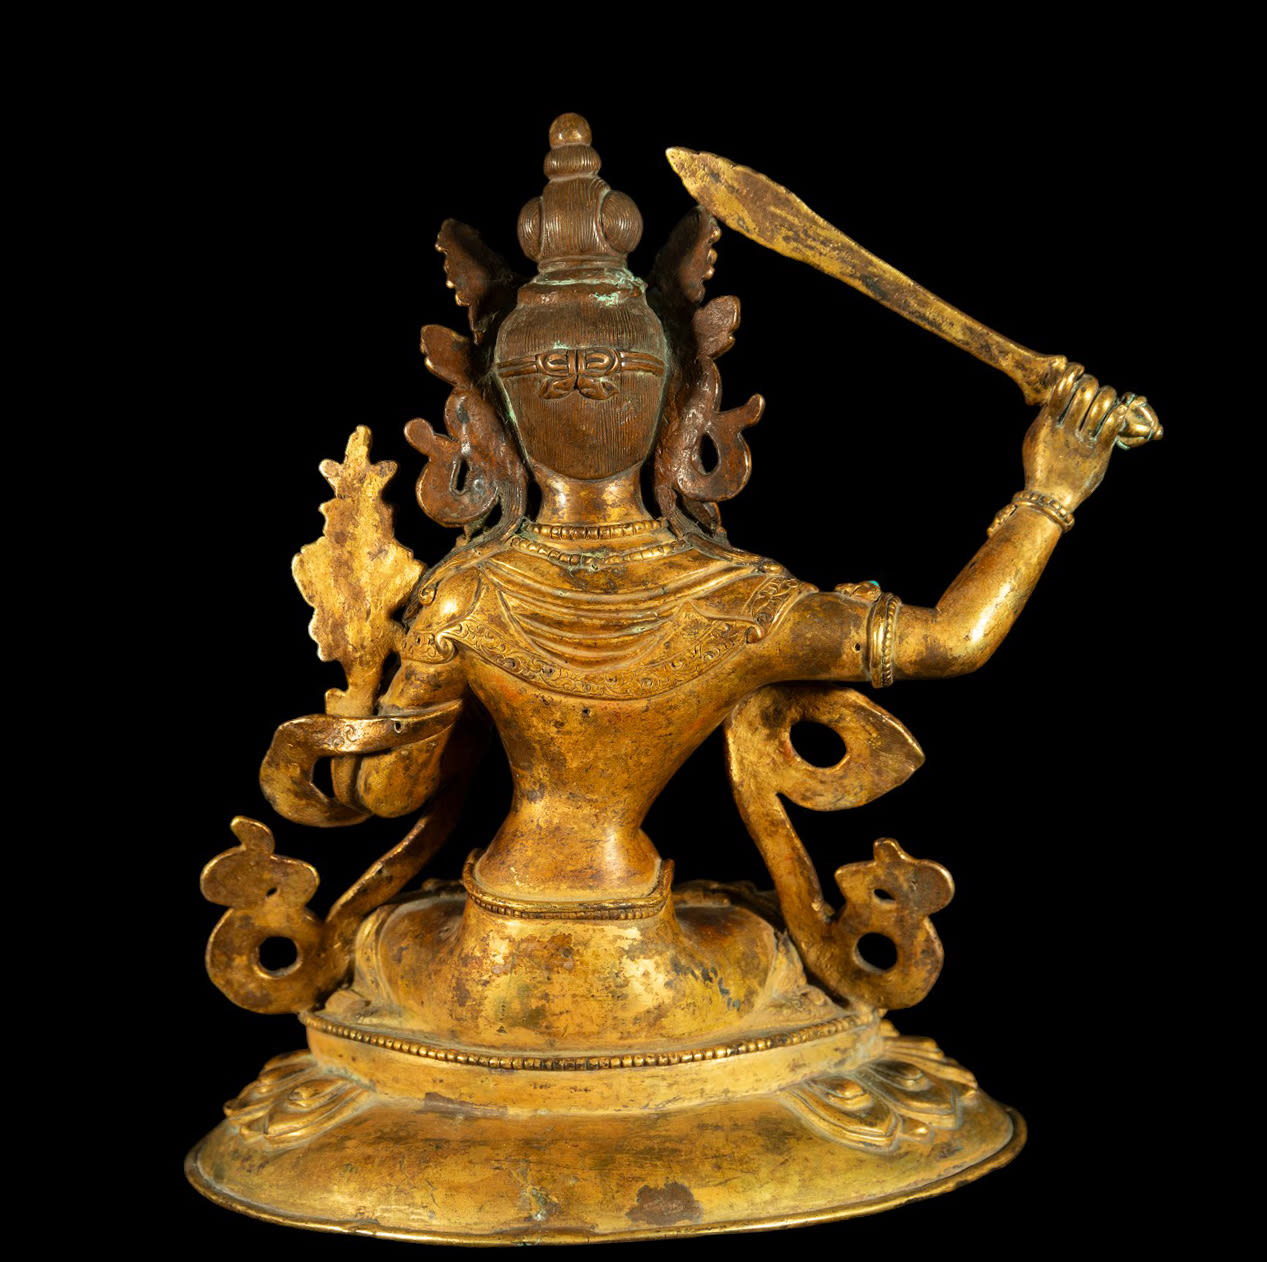 Exquisite Goddess Tara in gilt repoussé copper, Chinese school, Tibet, 19th century - Image 6 of 8